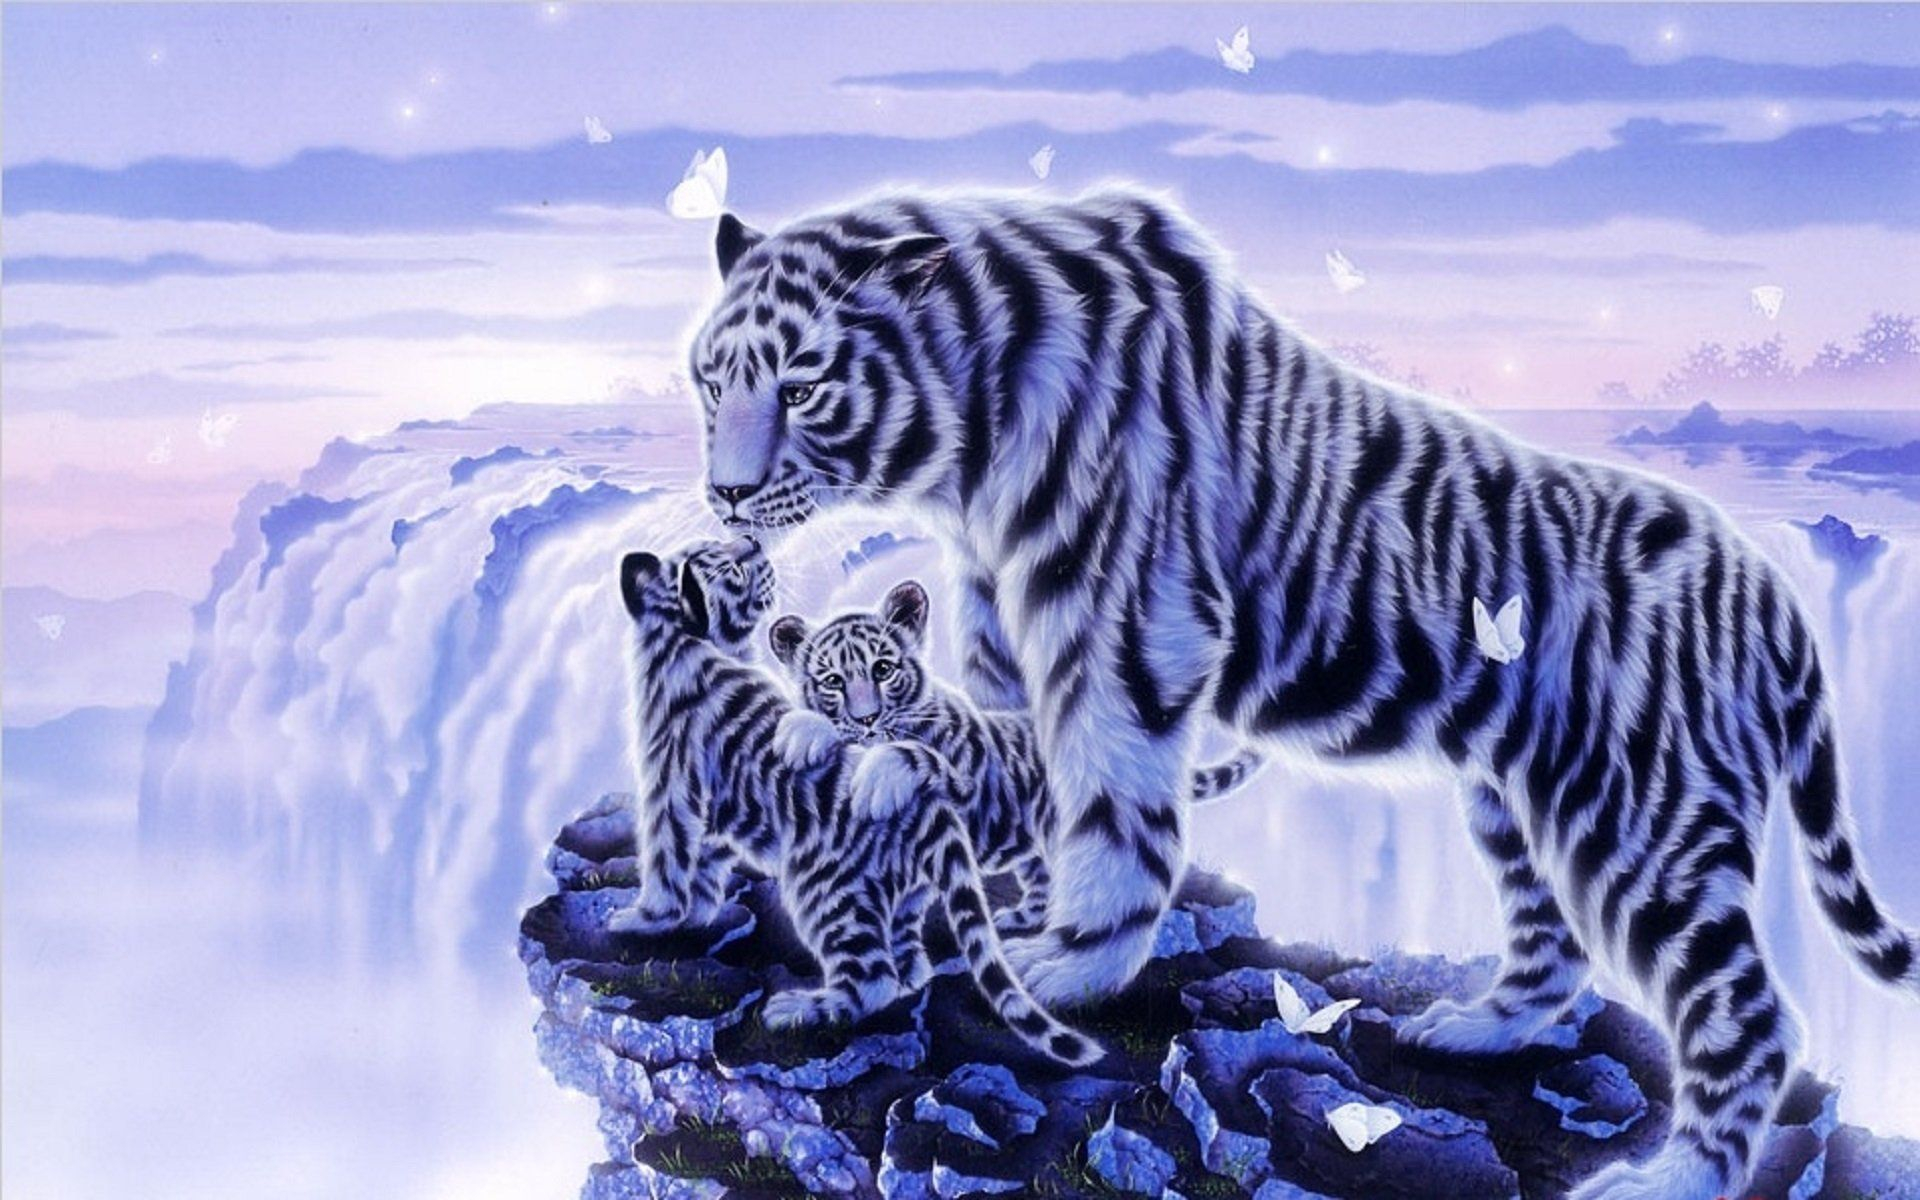 1920x1200 46 White Tiger HD Wallpapers | Backgrounds | Tiger pictures, White tiger, Animals